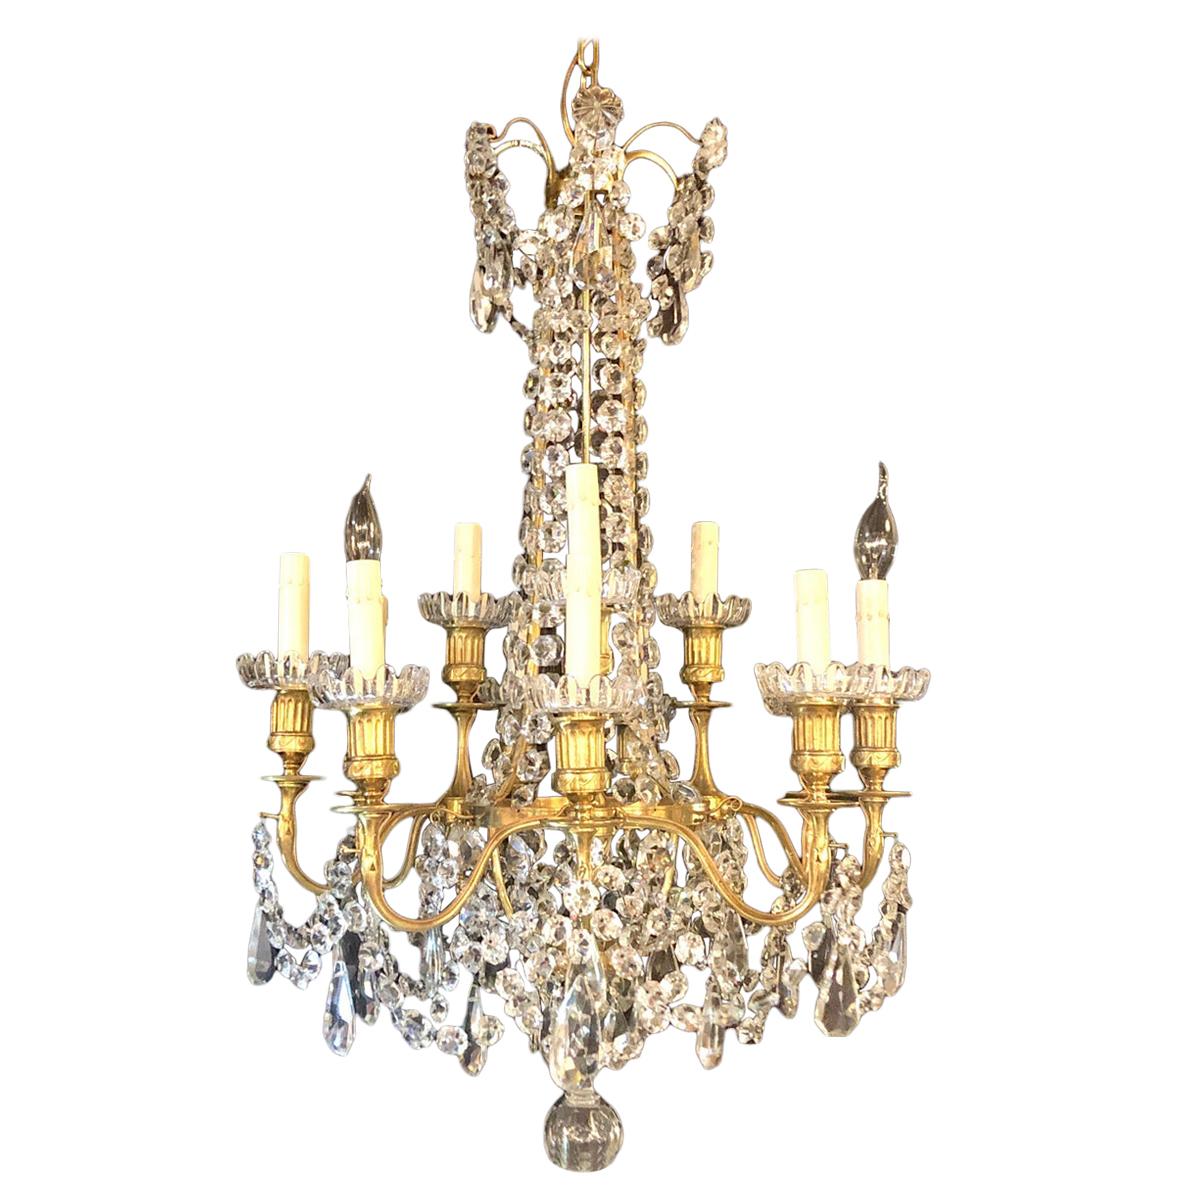 Signed Louis XVI French 12-Arm Baccarat Gilt Bronze and Crystal Chandelier